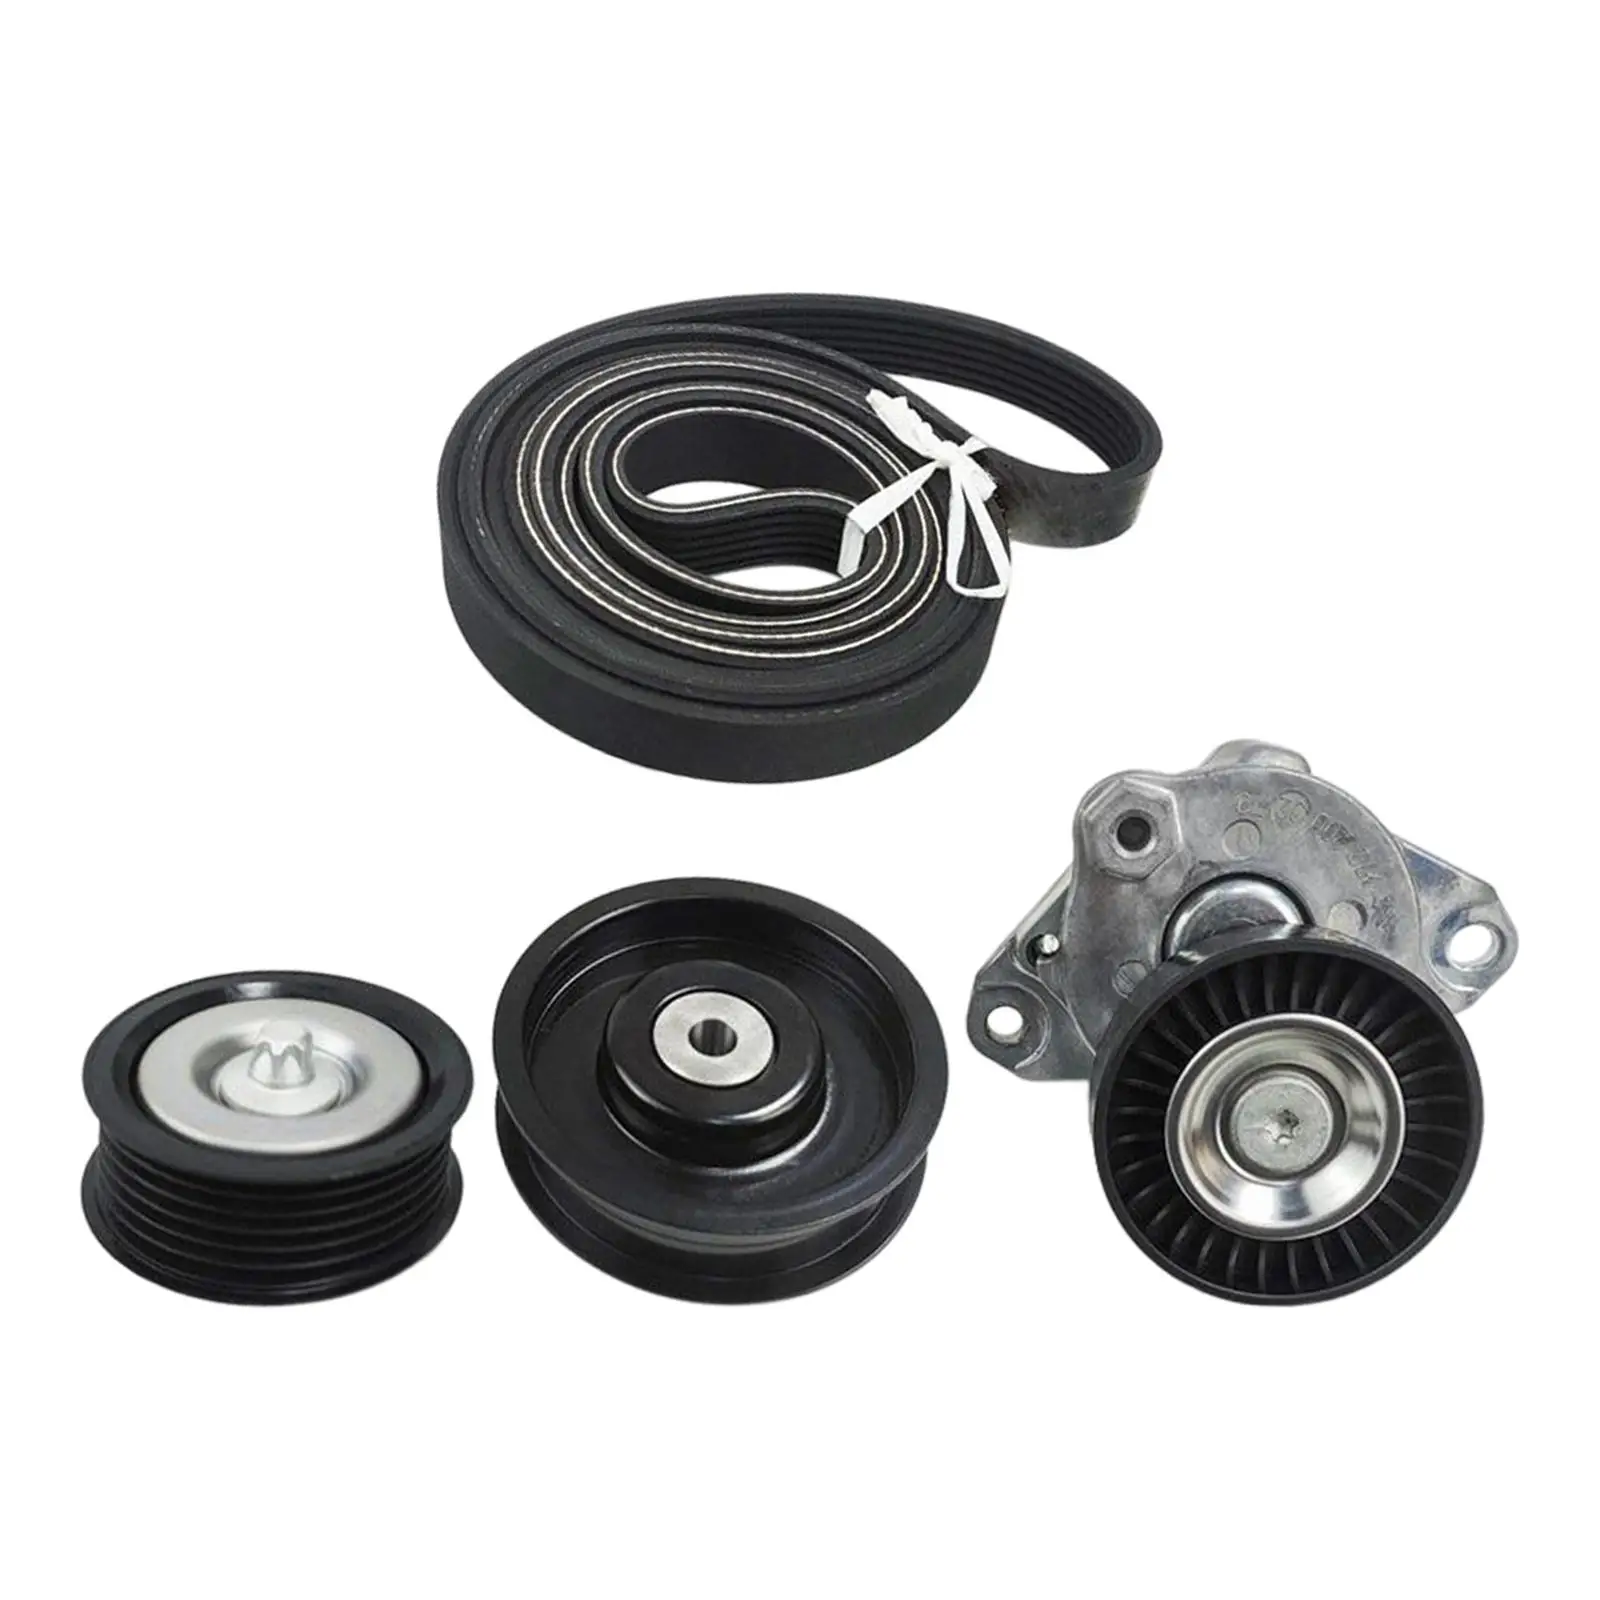 Drive Belt Tensioner and Idler Pulley Serpentine Belt Kit Repair Parts for Mercedes-benz C230 C280 CL550 E550 ml550 GLK350